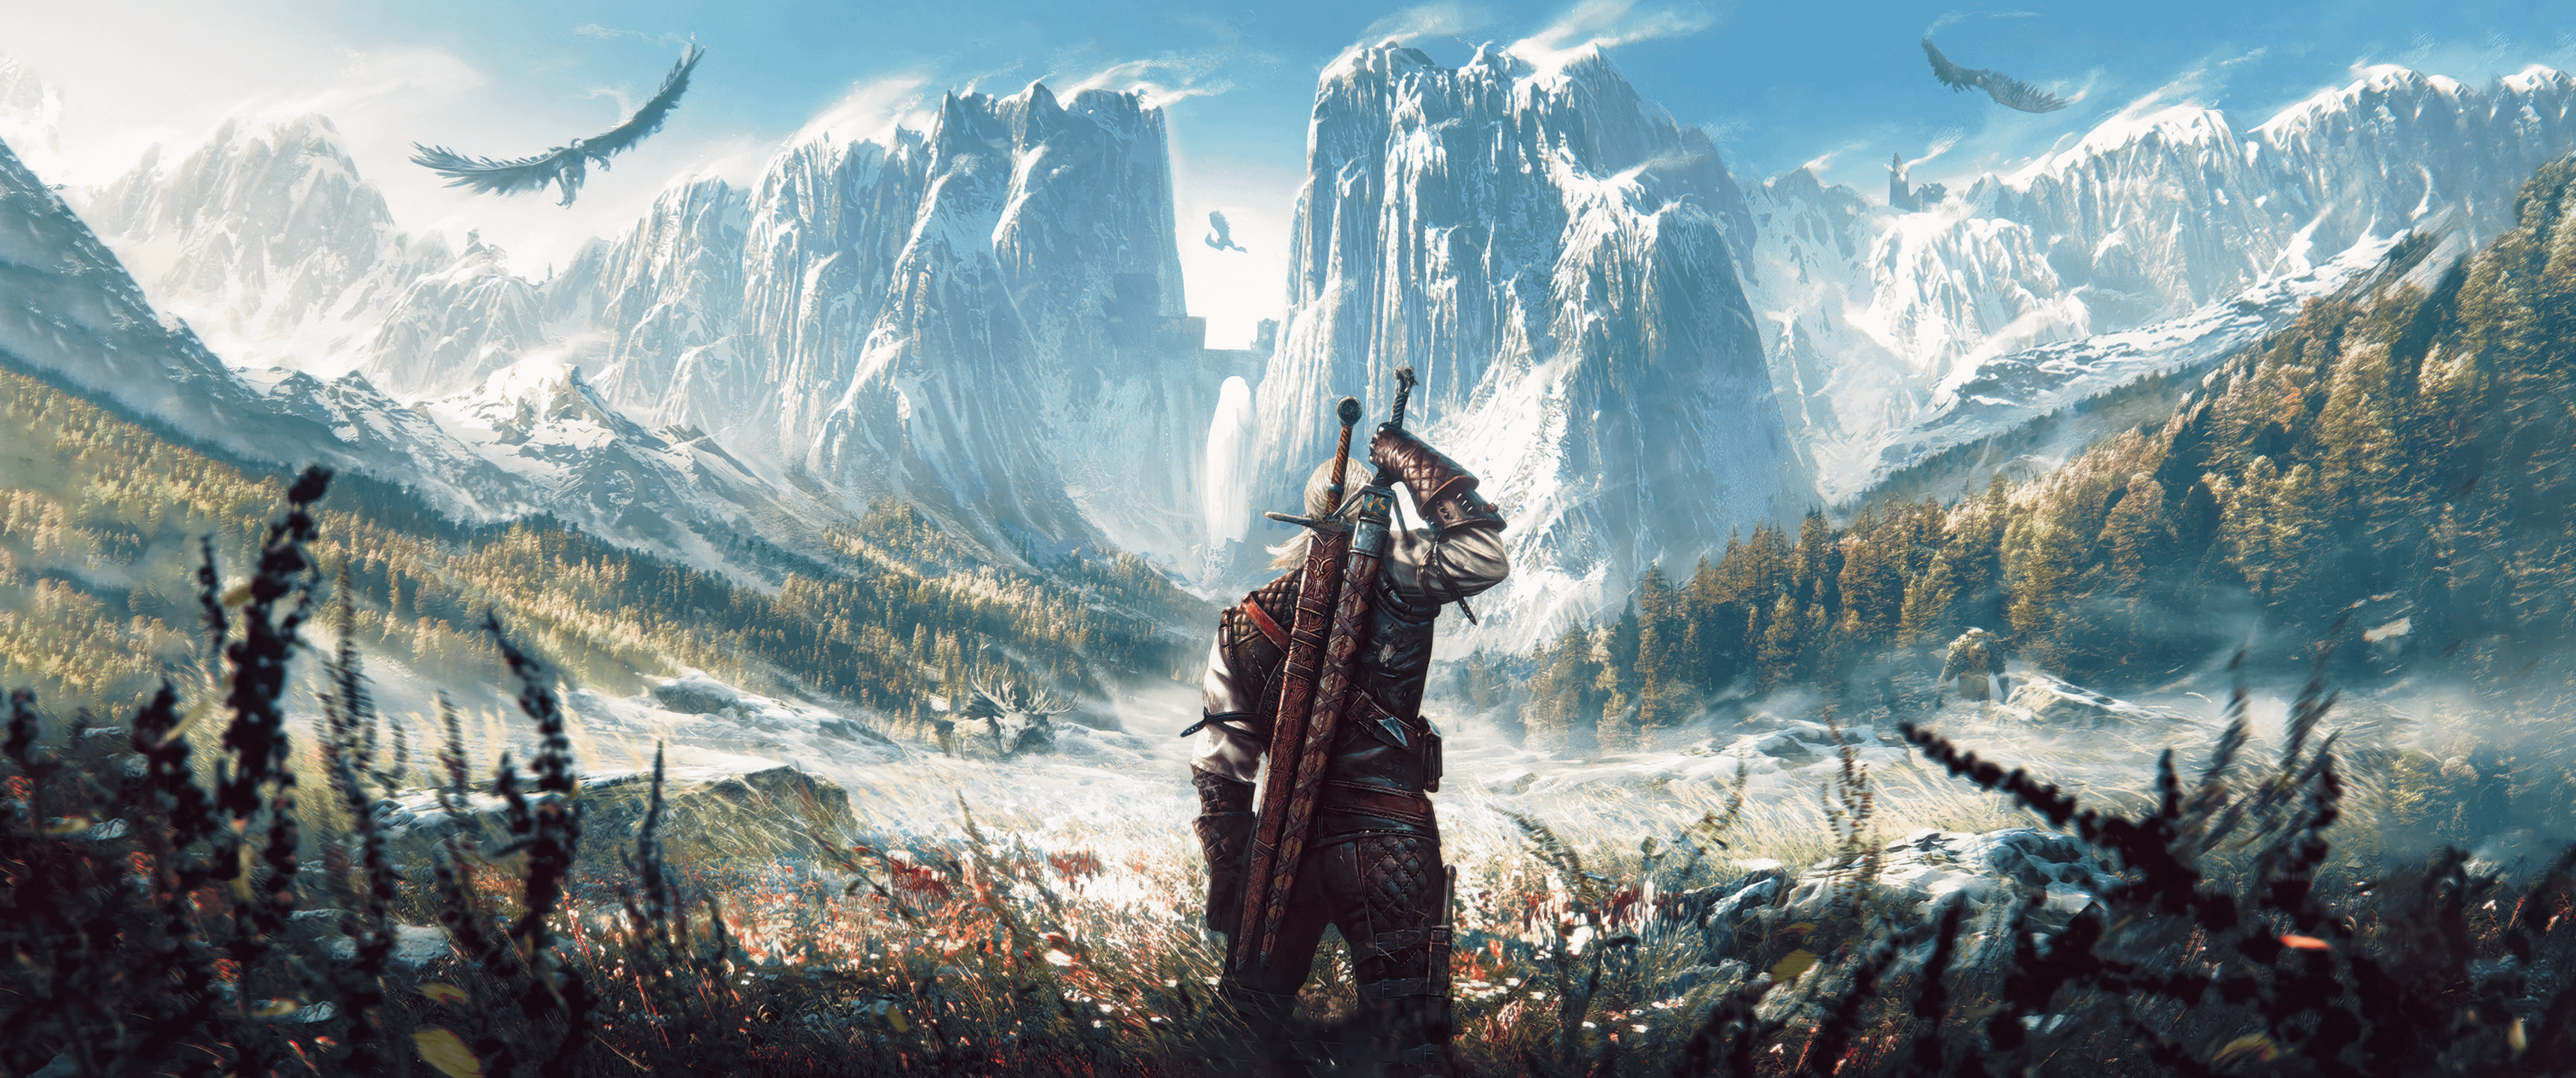 New Art The Witcher 3 [3440x1440]